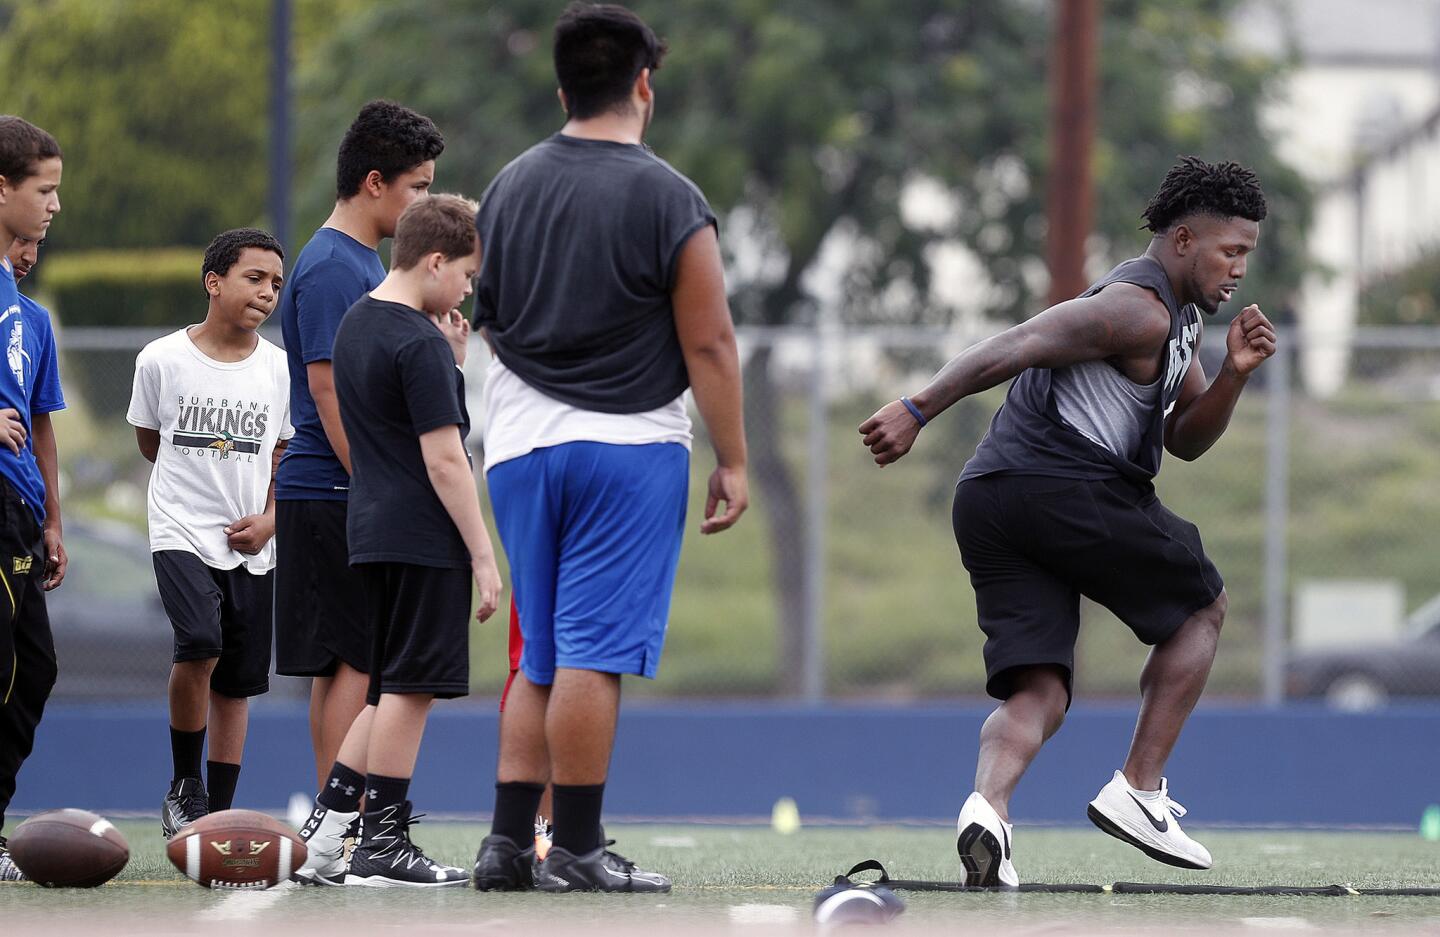 Camp leader James Williams demonstrates an agility exercise on the fitness latter to his campers at the inaugural Burbank High School football camp featuring former Bulldog running back and NFL hopeful James Williams on Wednesday, June 26, 2019.